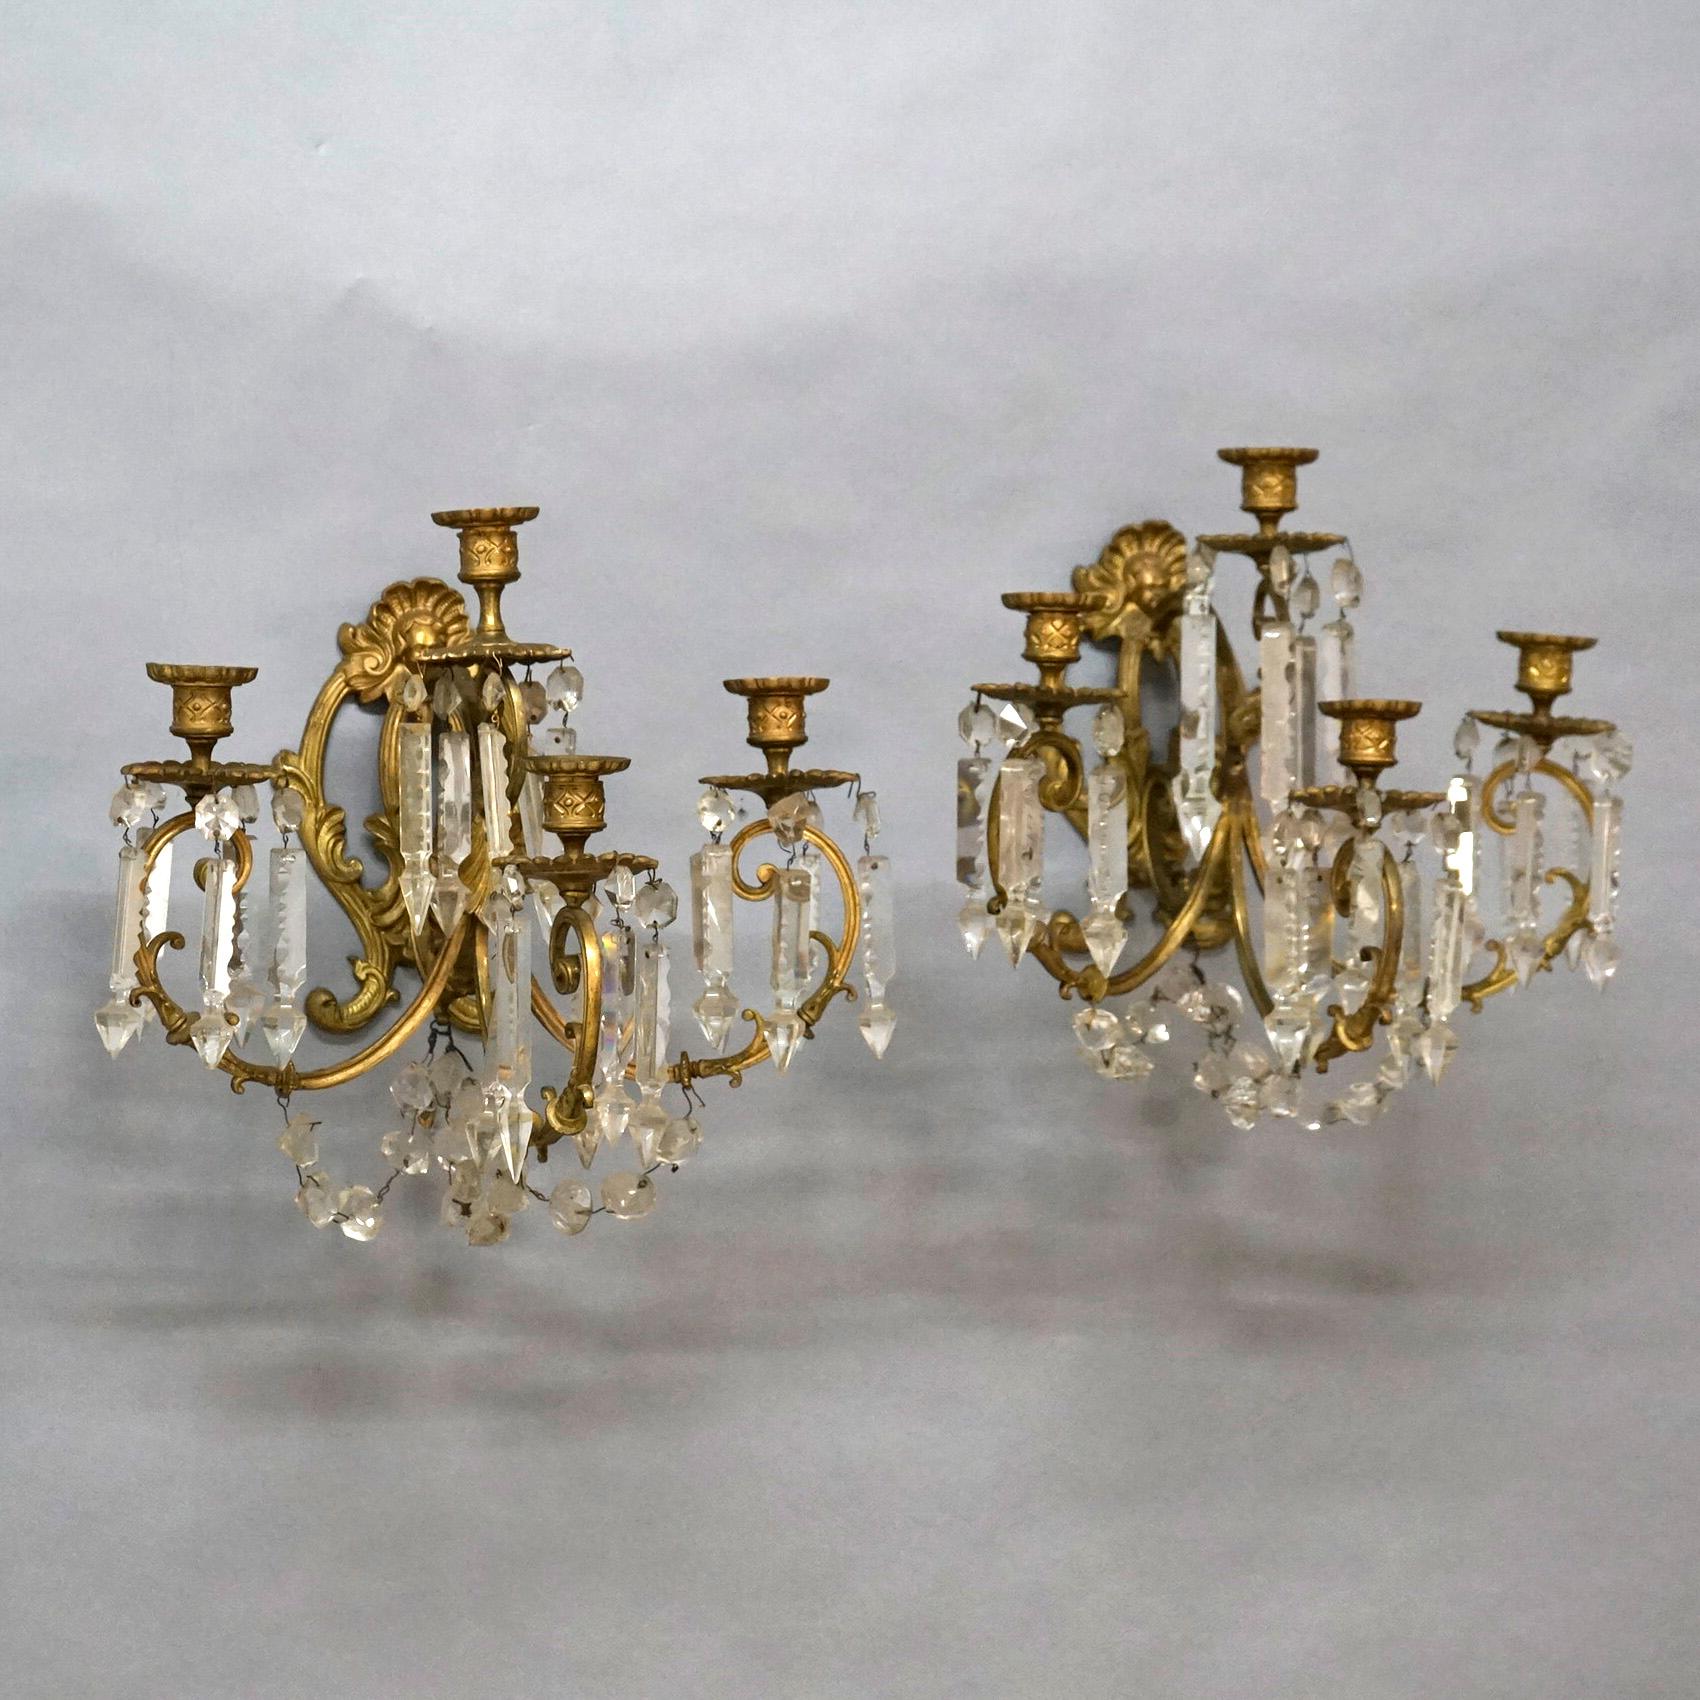 Classical Greek Antique Classical French Gilt Bronze & Cut Crystal Four-Arm Candle Sconces 19thC